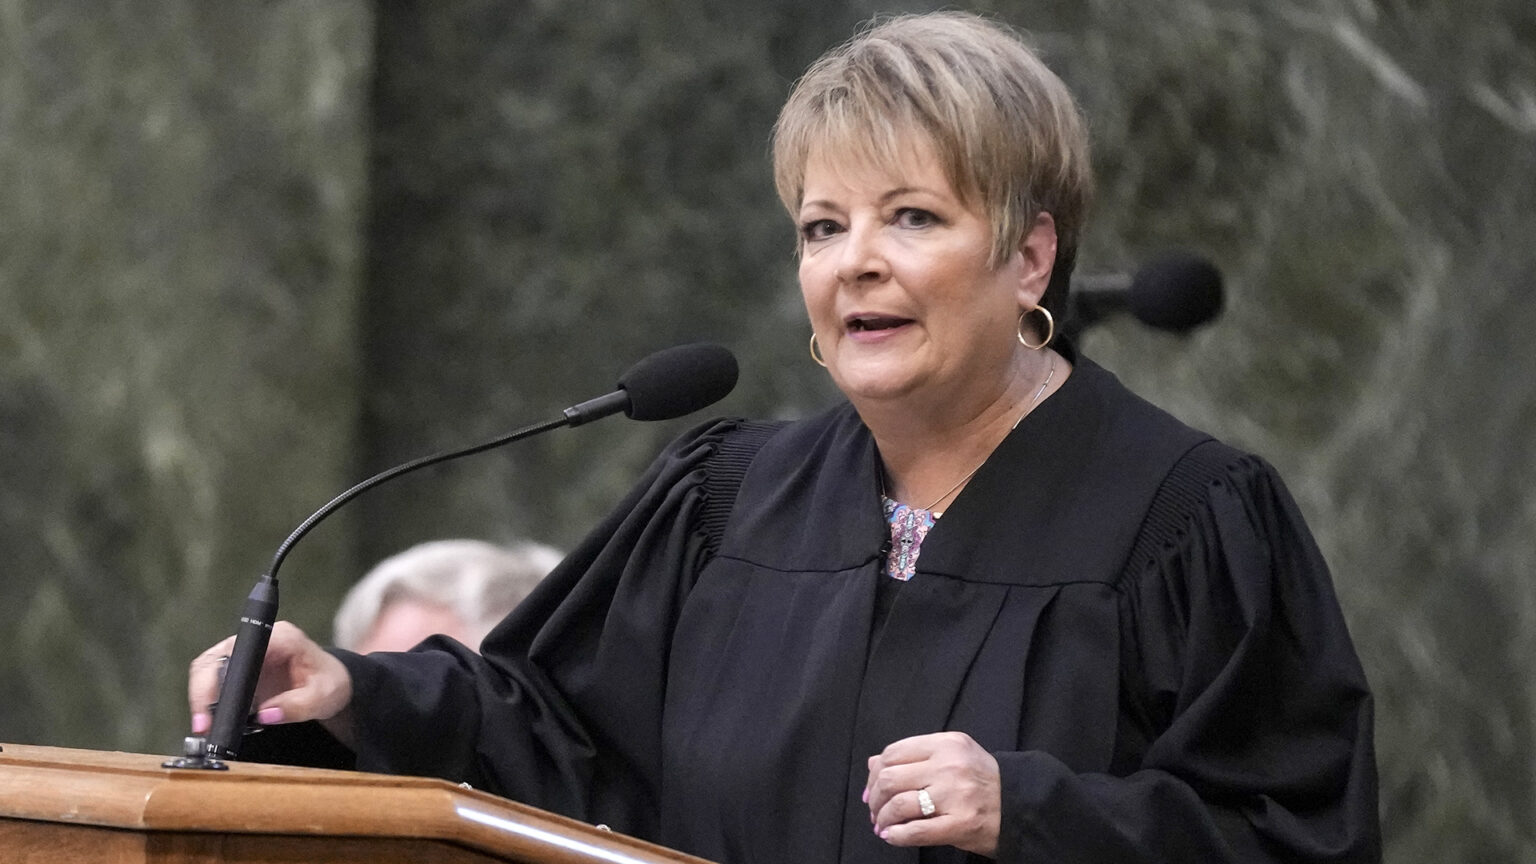 Janet Protasiewicz wears judicial robes and speaks into a microphone mounted to a wooden podium, with out-of-focus marble walls in the background.